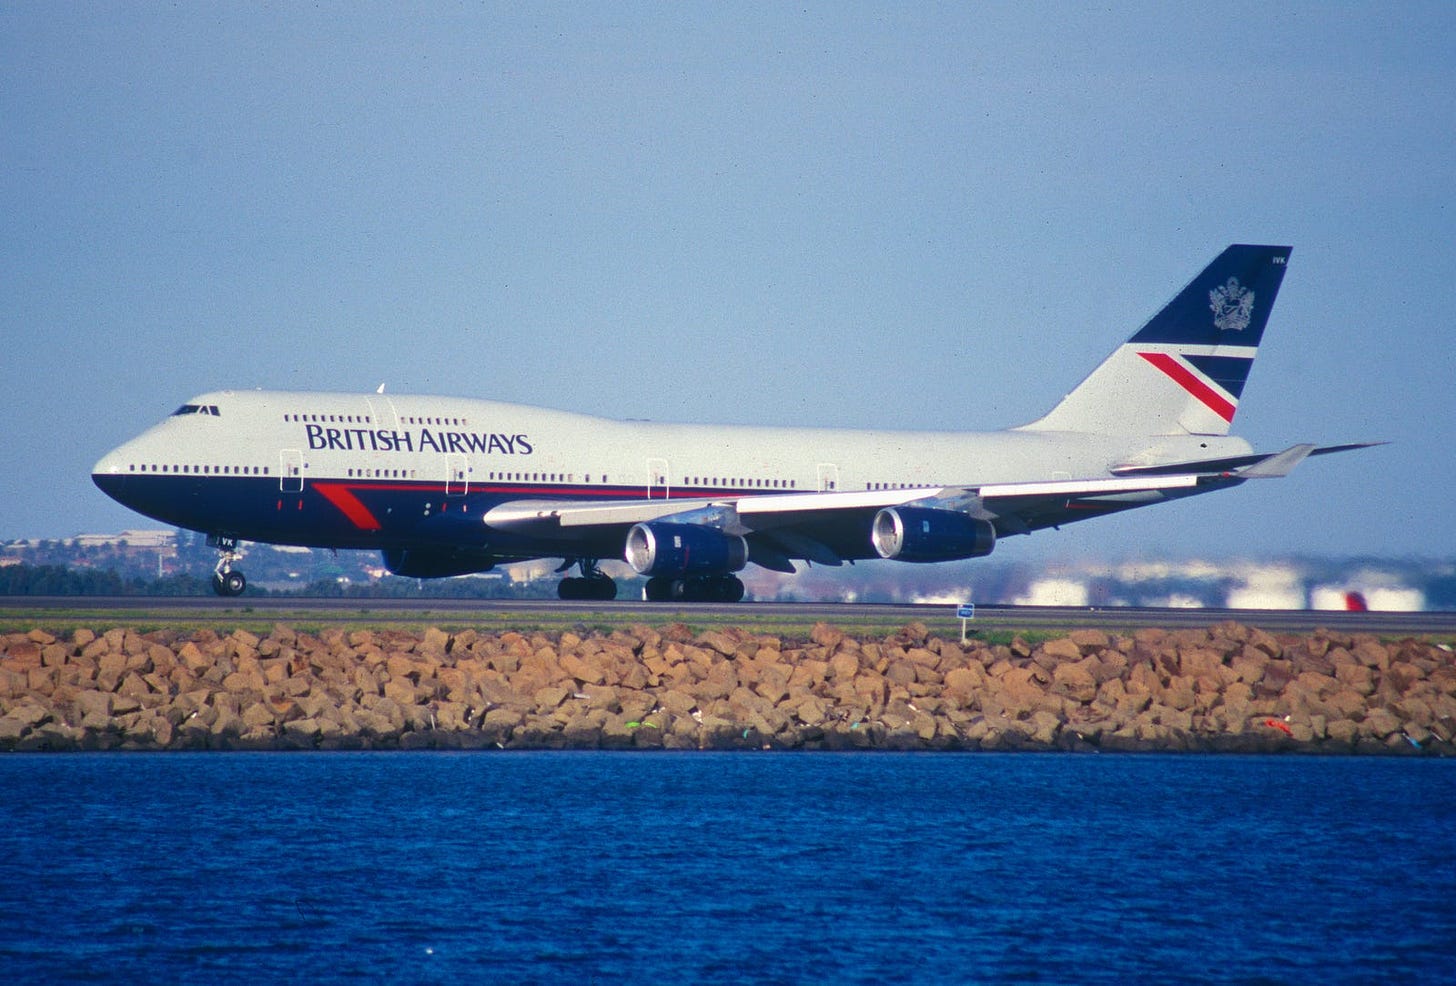 A British Airways 747 from the 1980s.